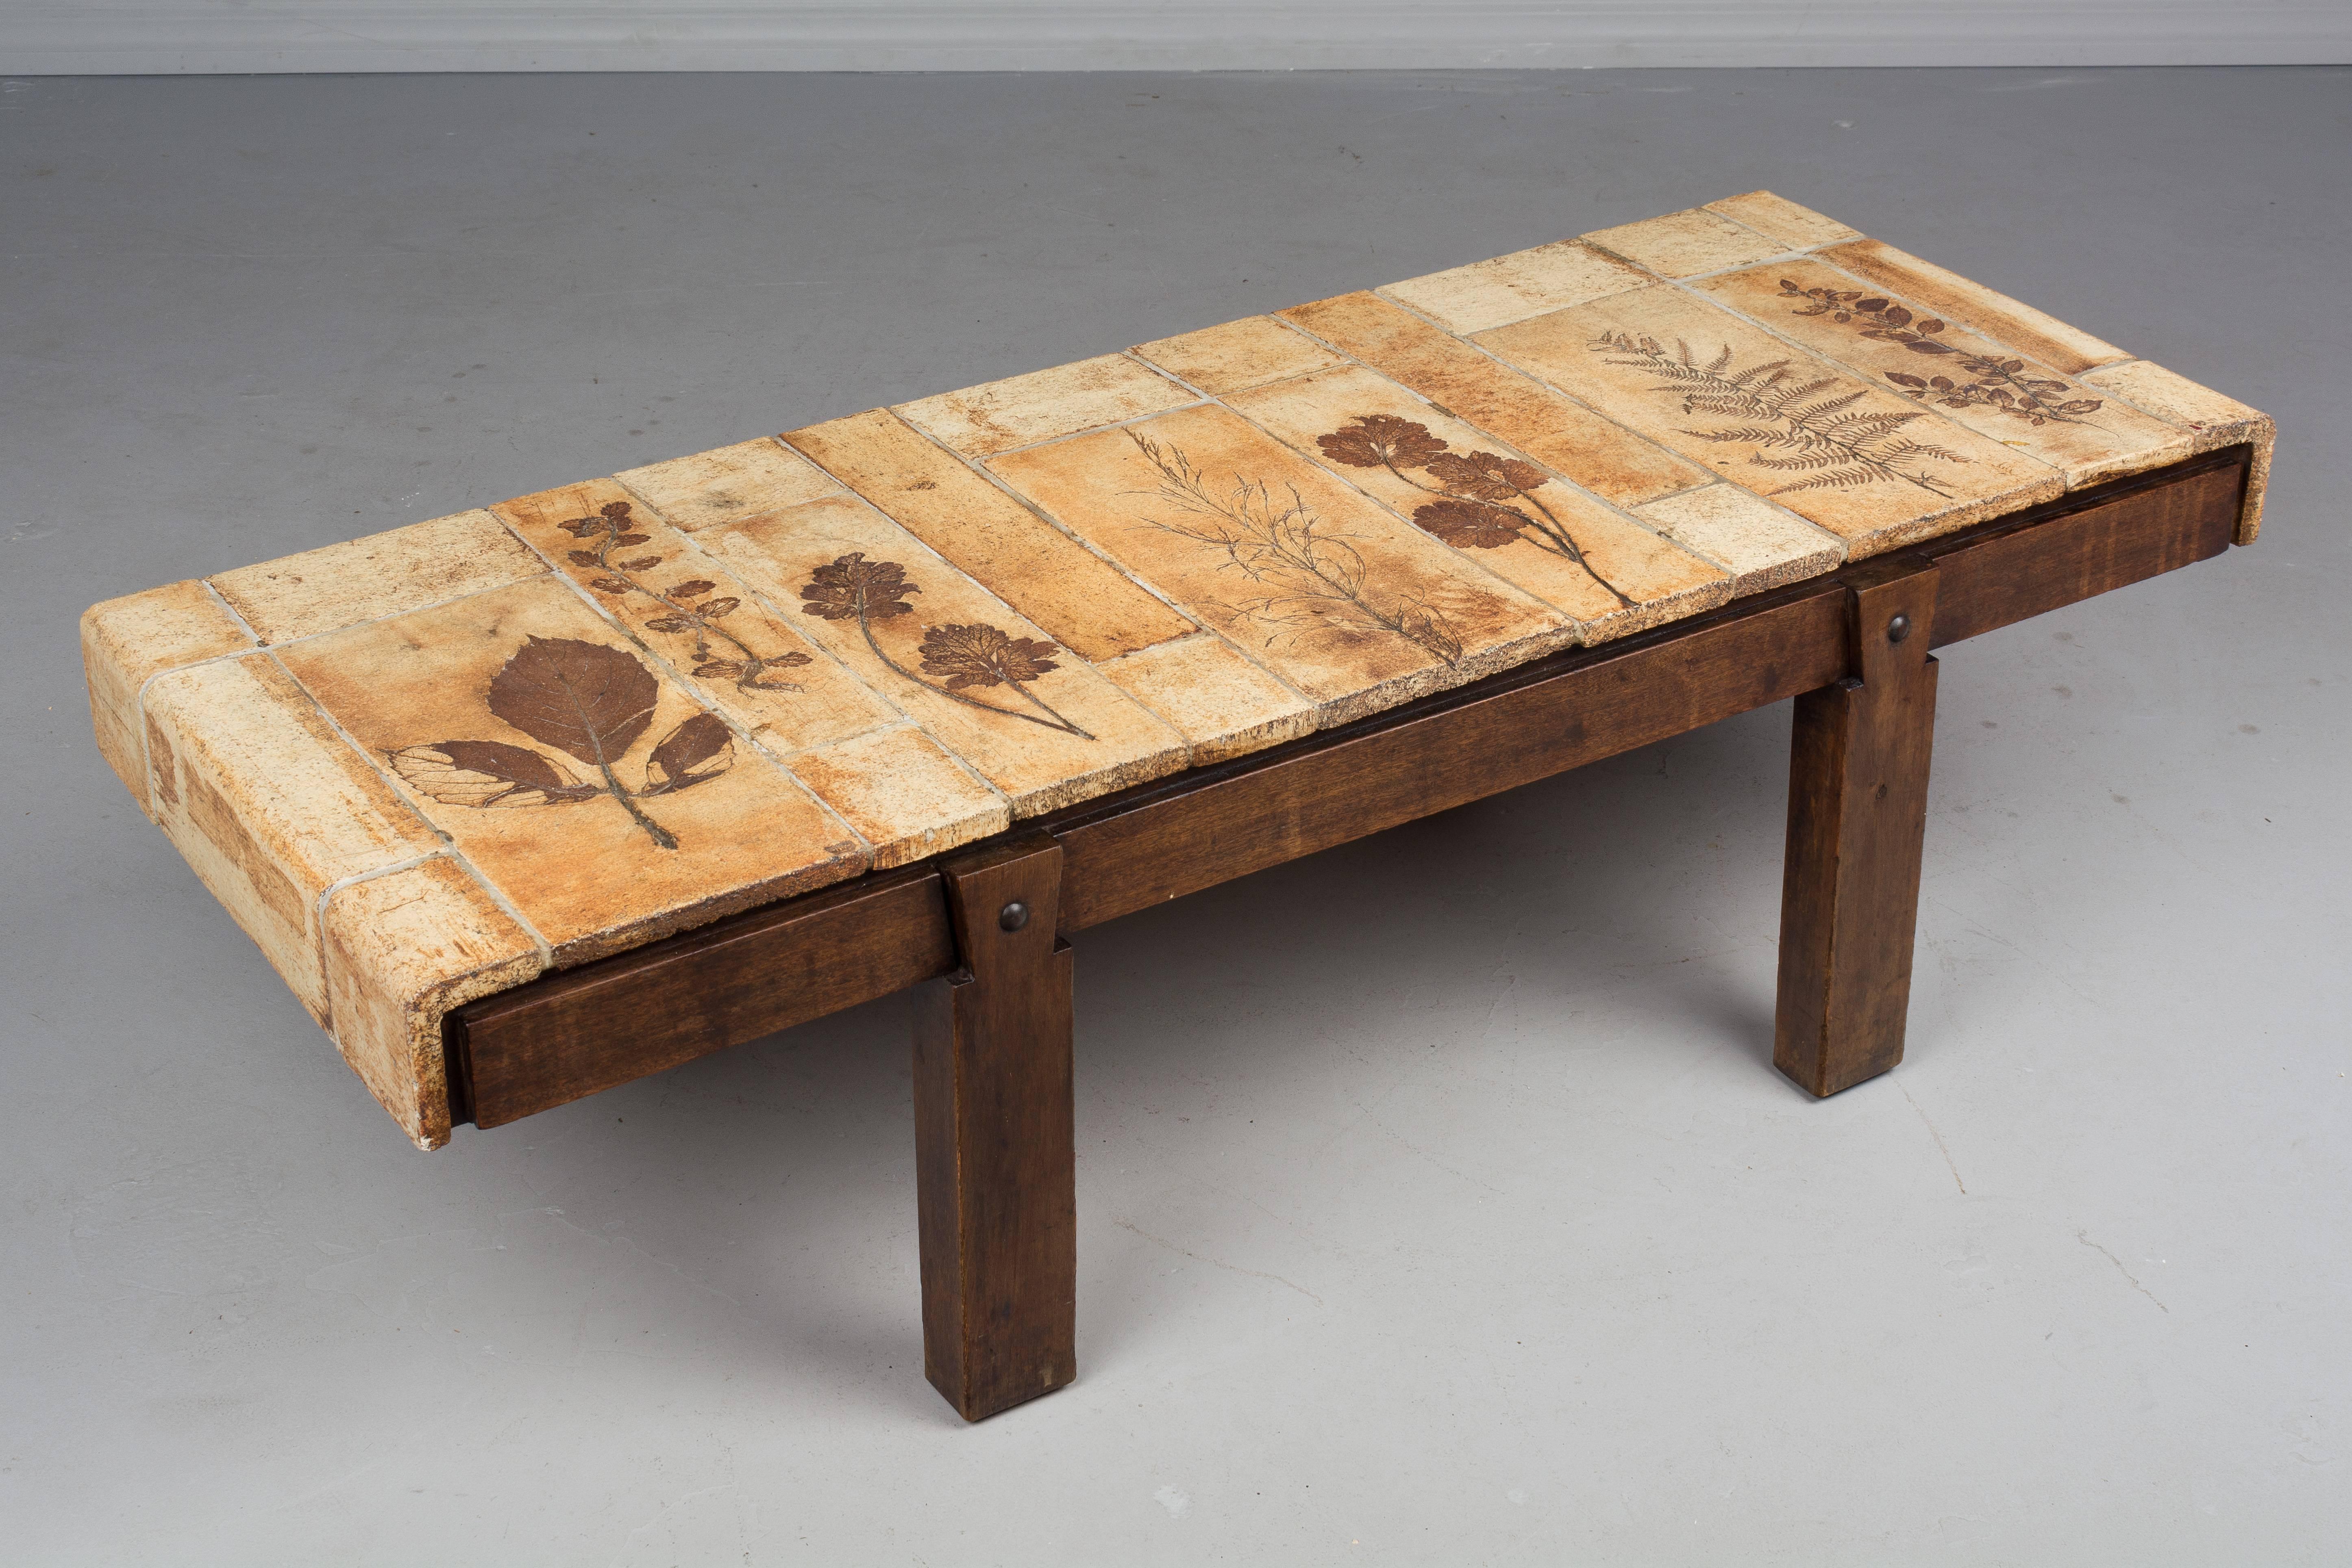 A Roger Capron coffee table from his Gariggue series with a solid oak base and a top made of finely crafted earthenware ceramic tiles imprinted with the fossils of various plant specimens. Garrigue refers to the vegetation that grows wild on the